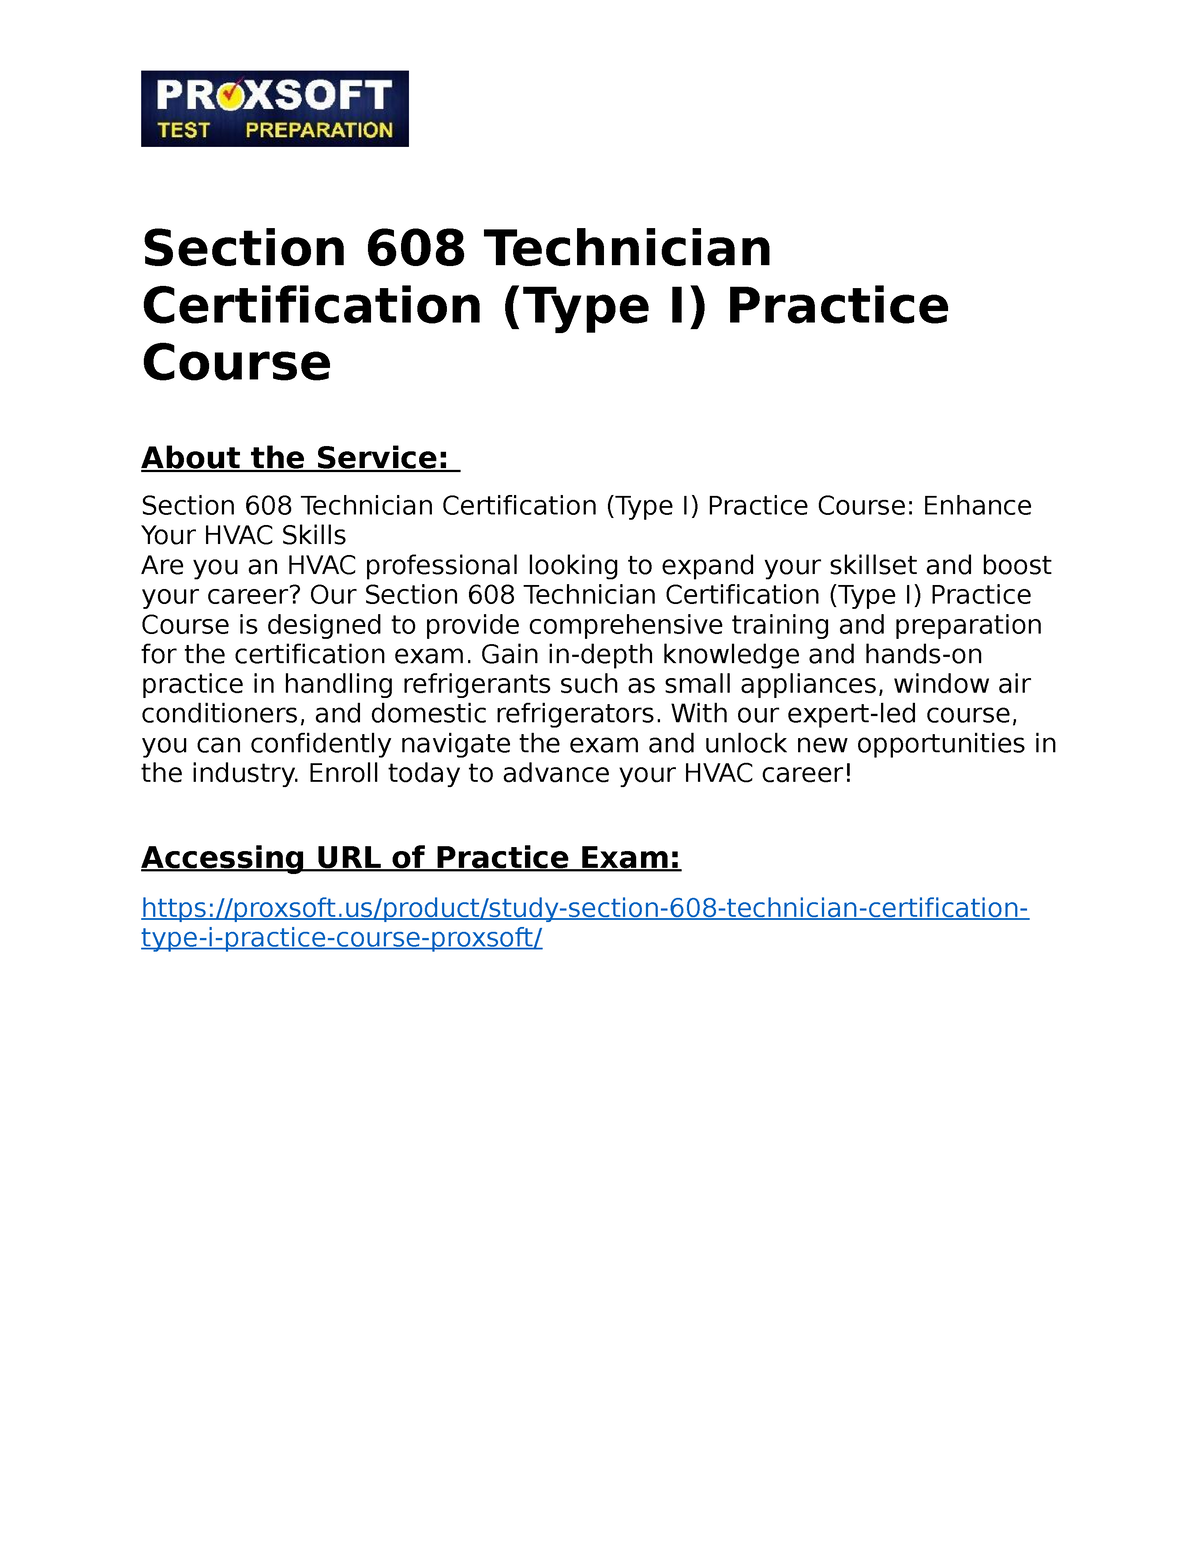 Section 608 Technician Certification (Type I) Practice Course Gain in